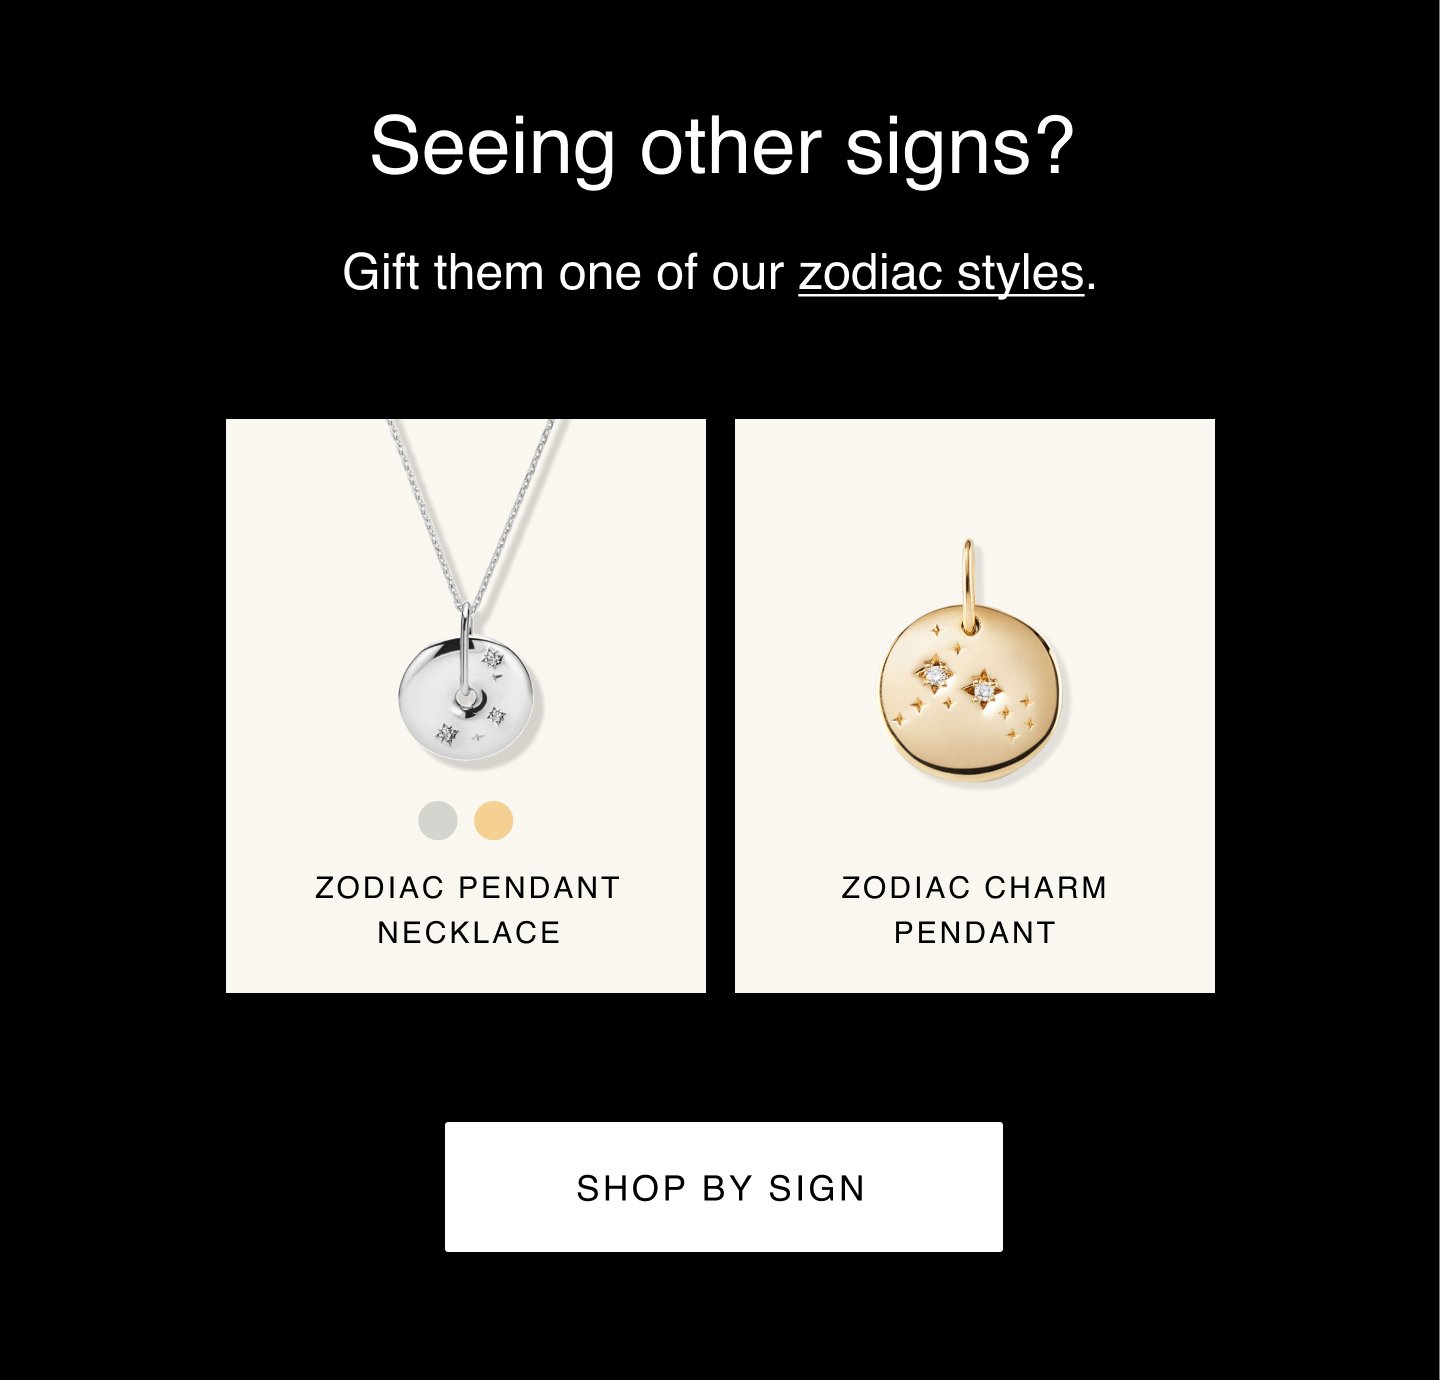 Seeing other signs? Gift them one of our zodiac styles. Zodiac Pendant Necklace. Zodiac Charm Pendant. Shop by Sign.